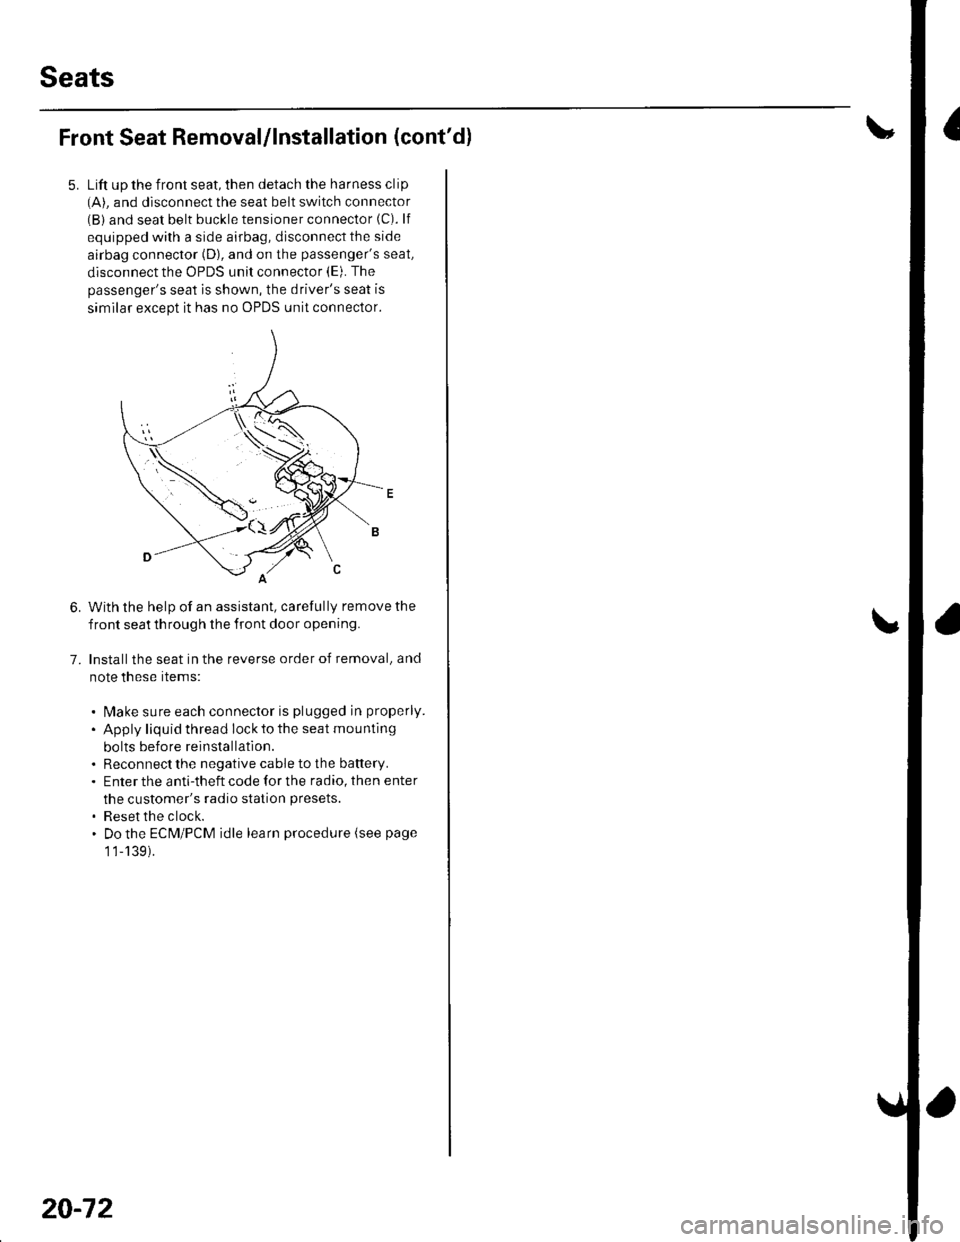 HONDA CIVIC 2003 7.G Workshop Manual Seats
Front Seat Removal/lnstallation (contdl
Lift up the front seat, then detach the harness clip(A). and disconnect the seat belt switch connector(B) and seat belt buckle tensioner connector (C). l